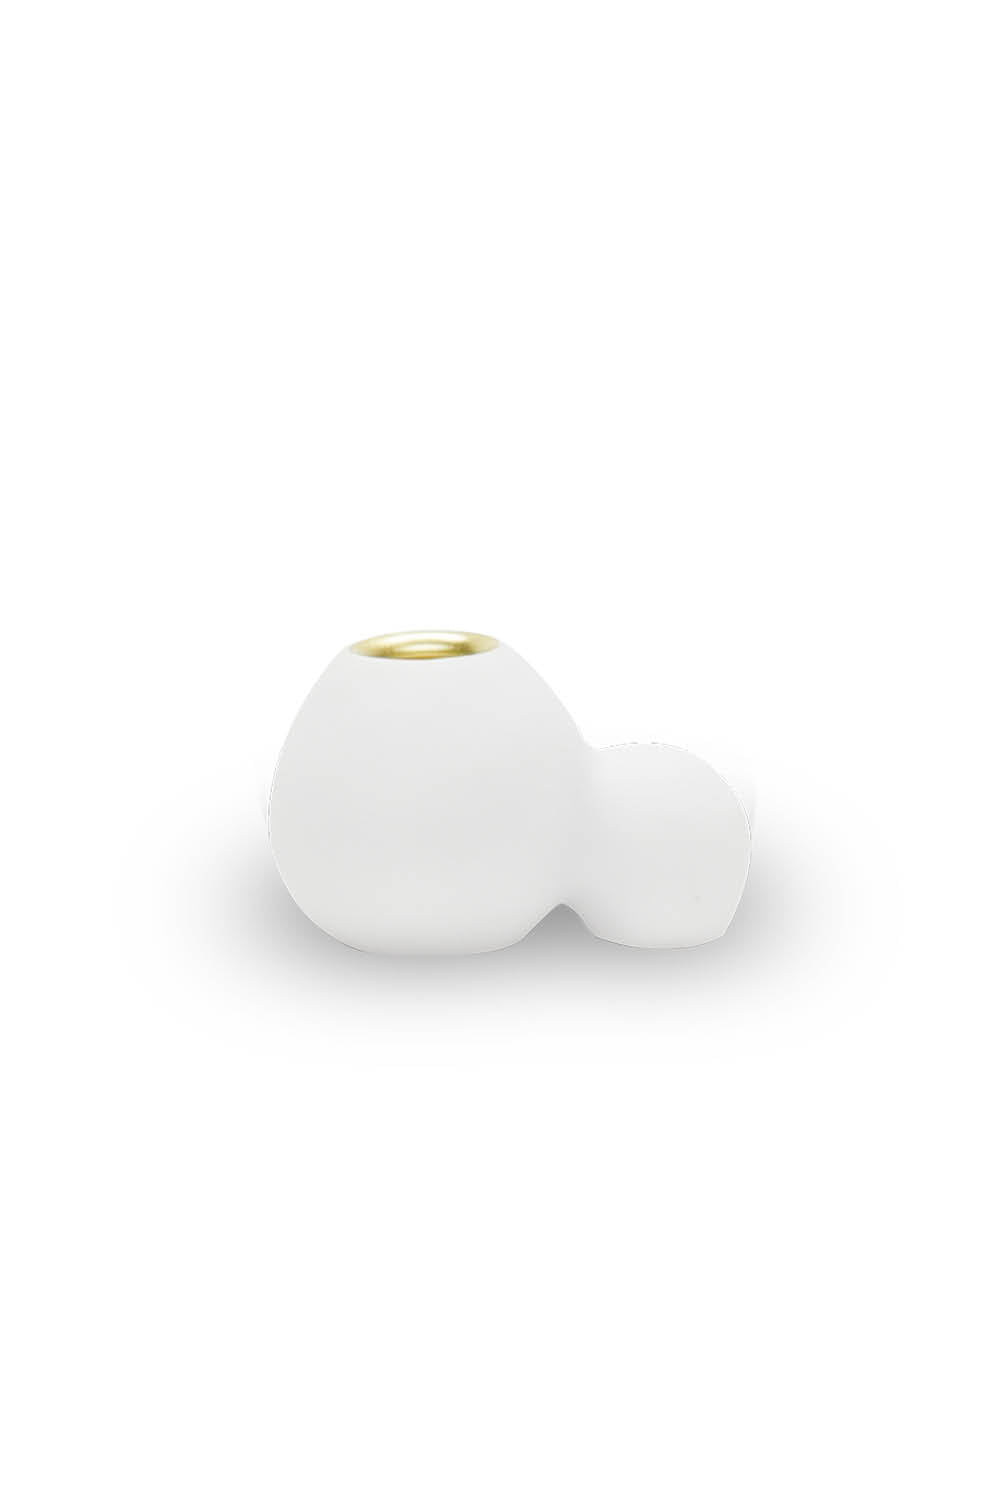 BUBBLE Petite Candleholder in White